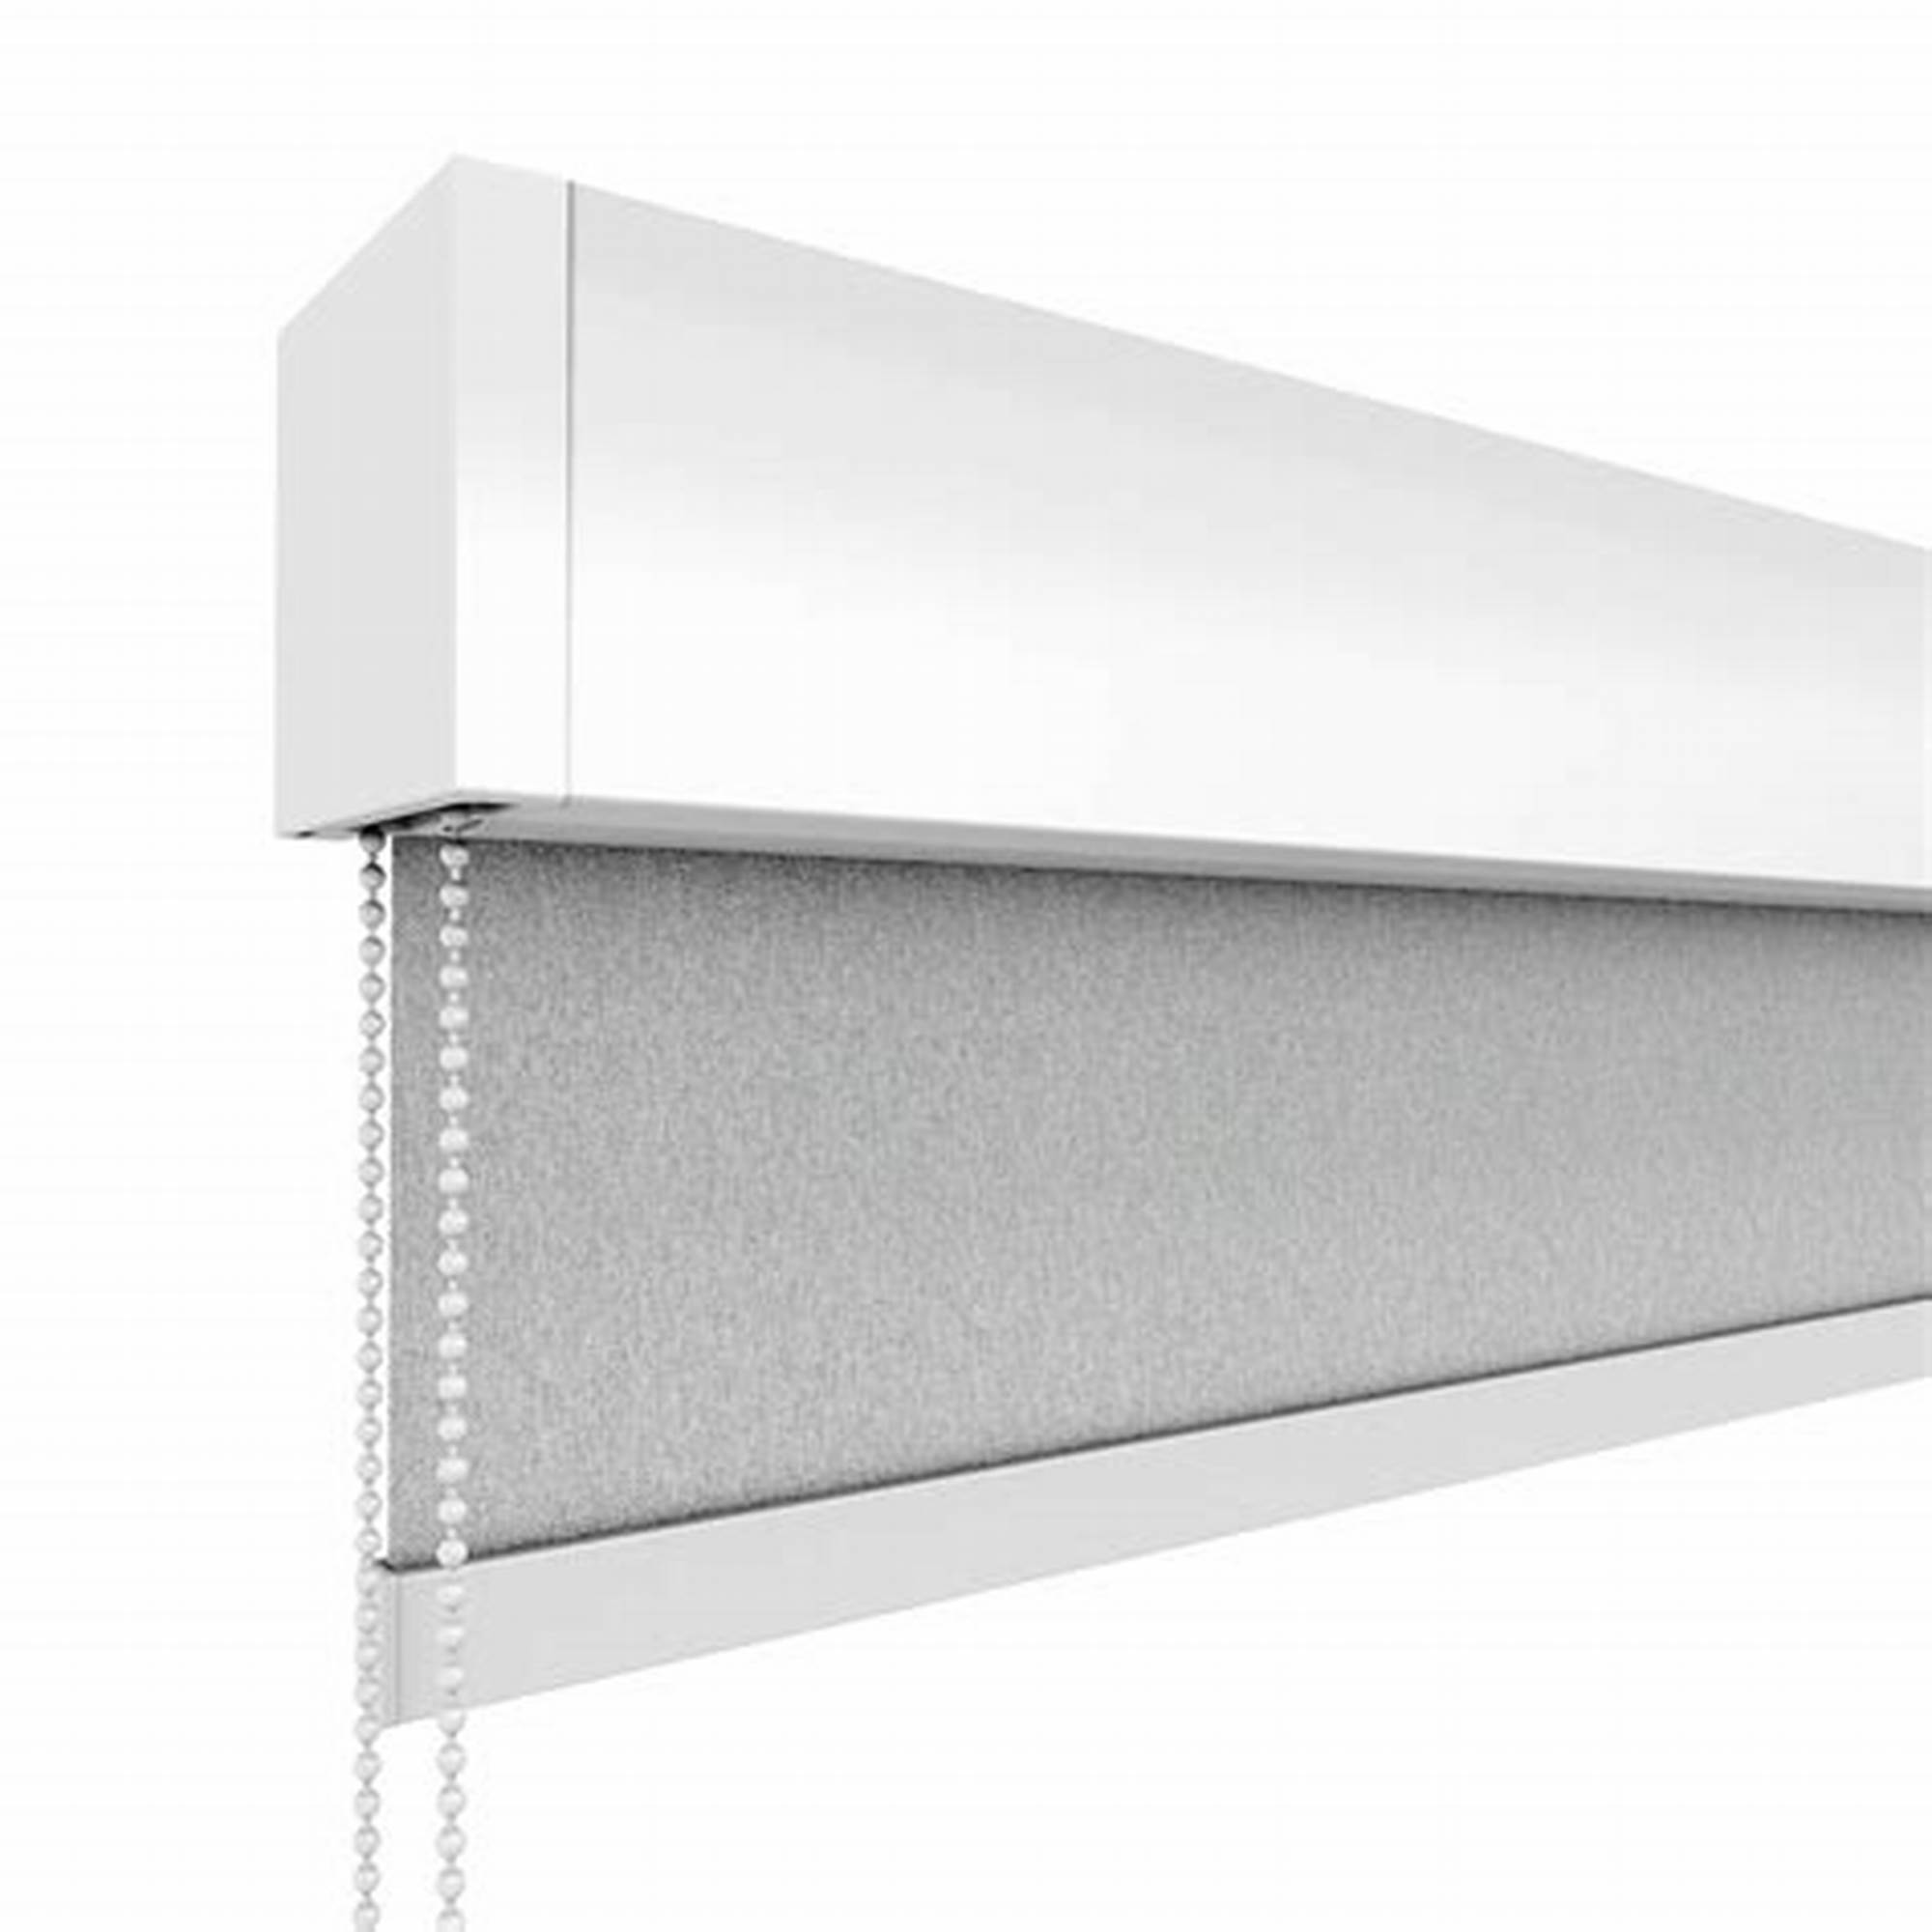 An Introduction About Manual Roller blinds.